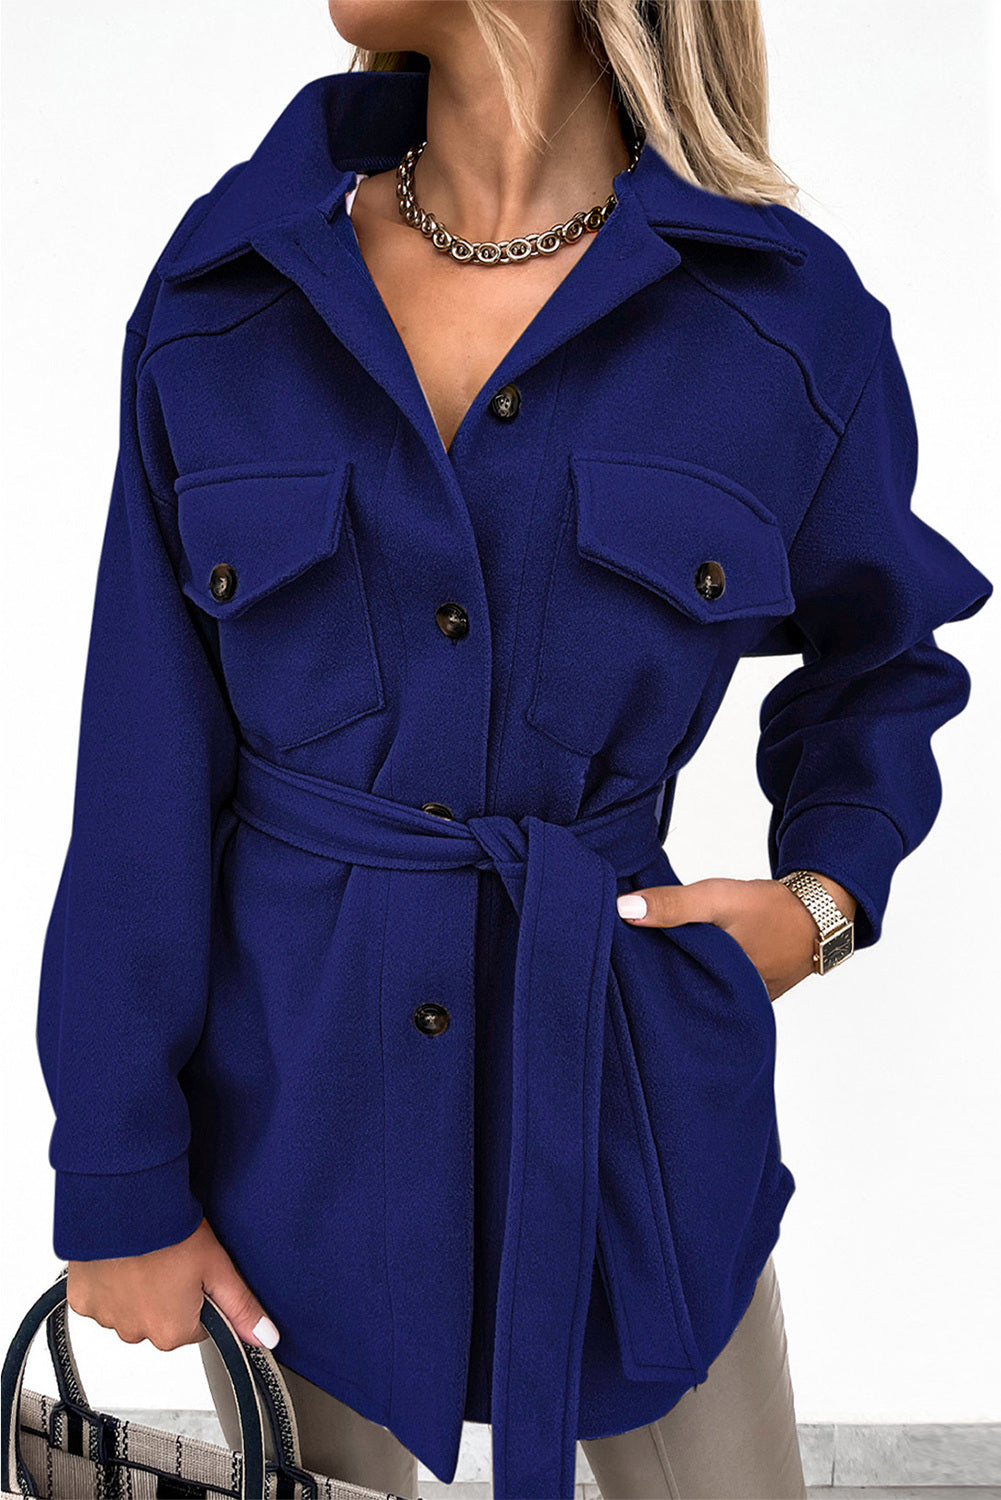 Blue Women's Lapel Button Down Coat Winter Belted Coat with Pockets LC8511359-105